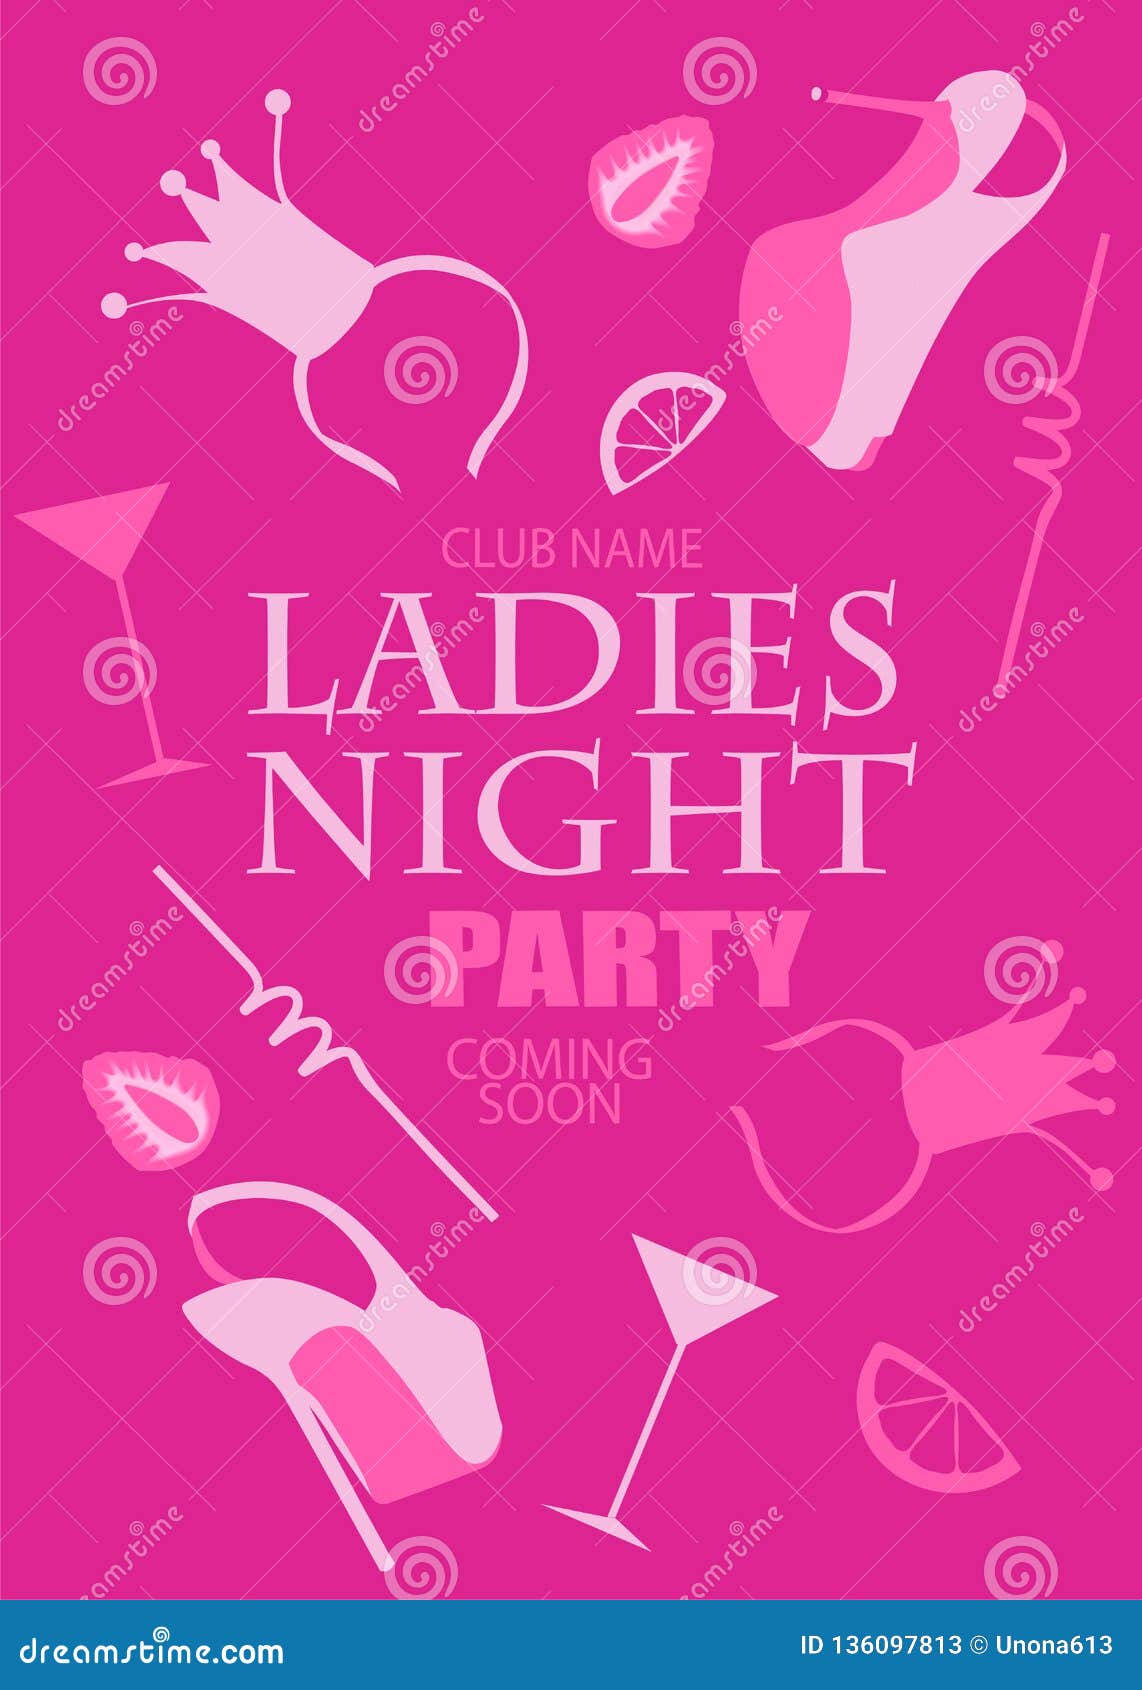 Ladies Night Banner with Girl Objects. Stock Vector - Illustration of ...